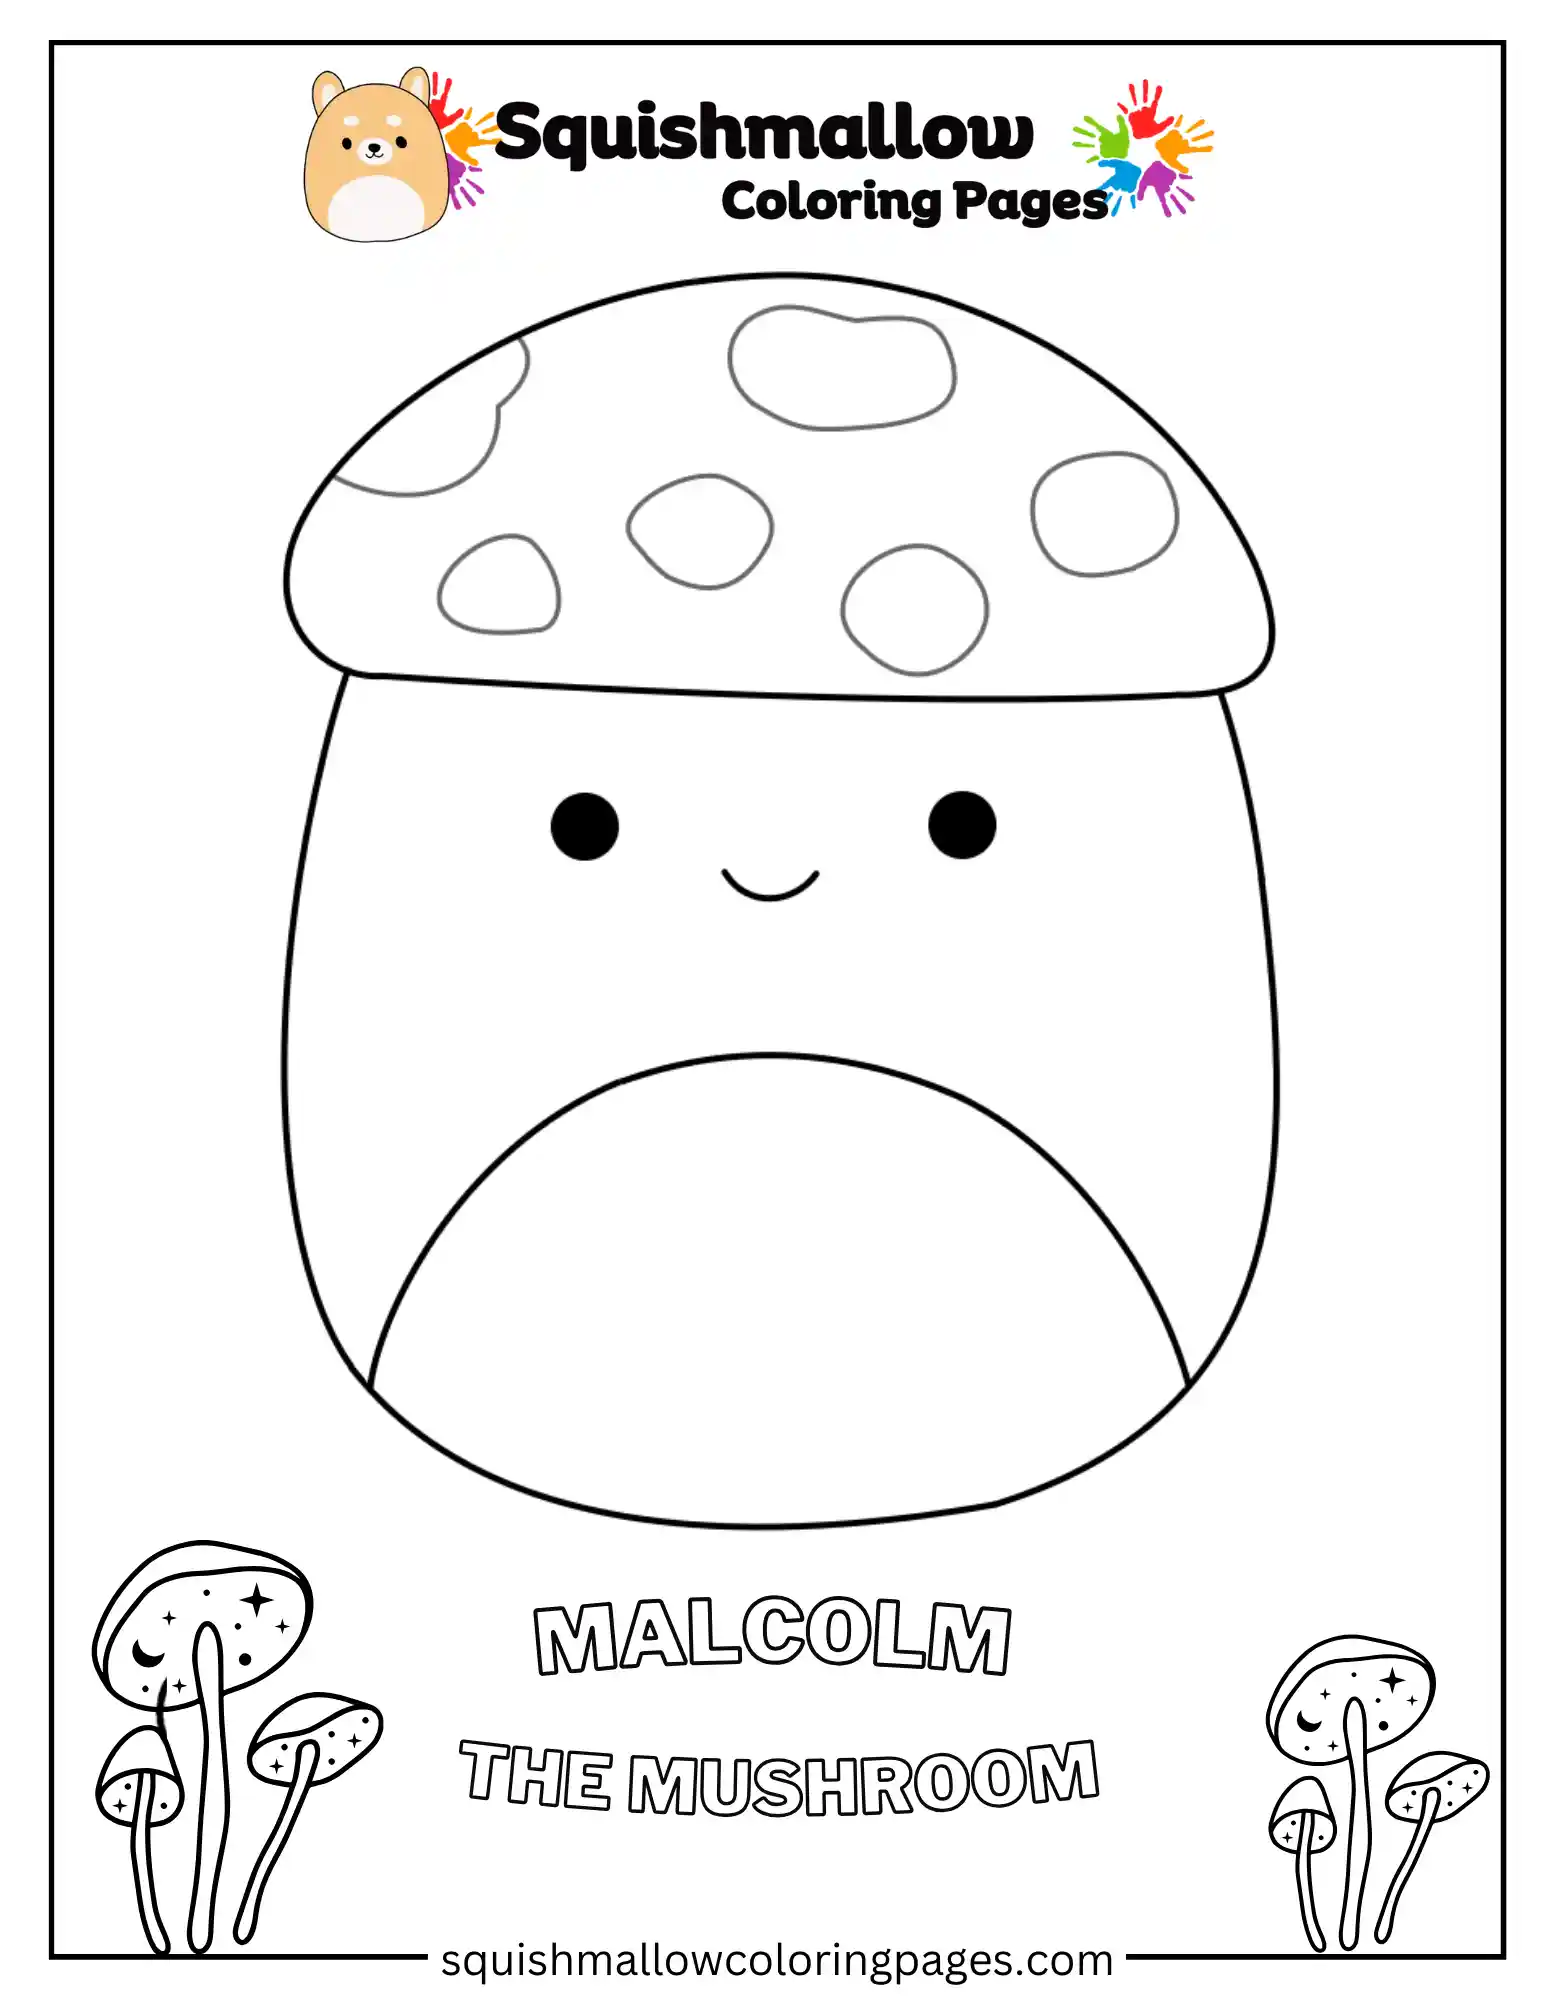 Malcolm The Mushroom Squishmallow Coloring Page